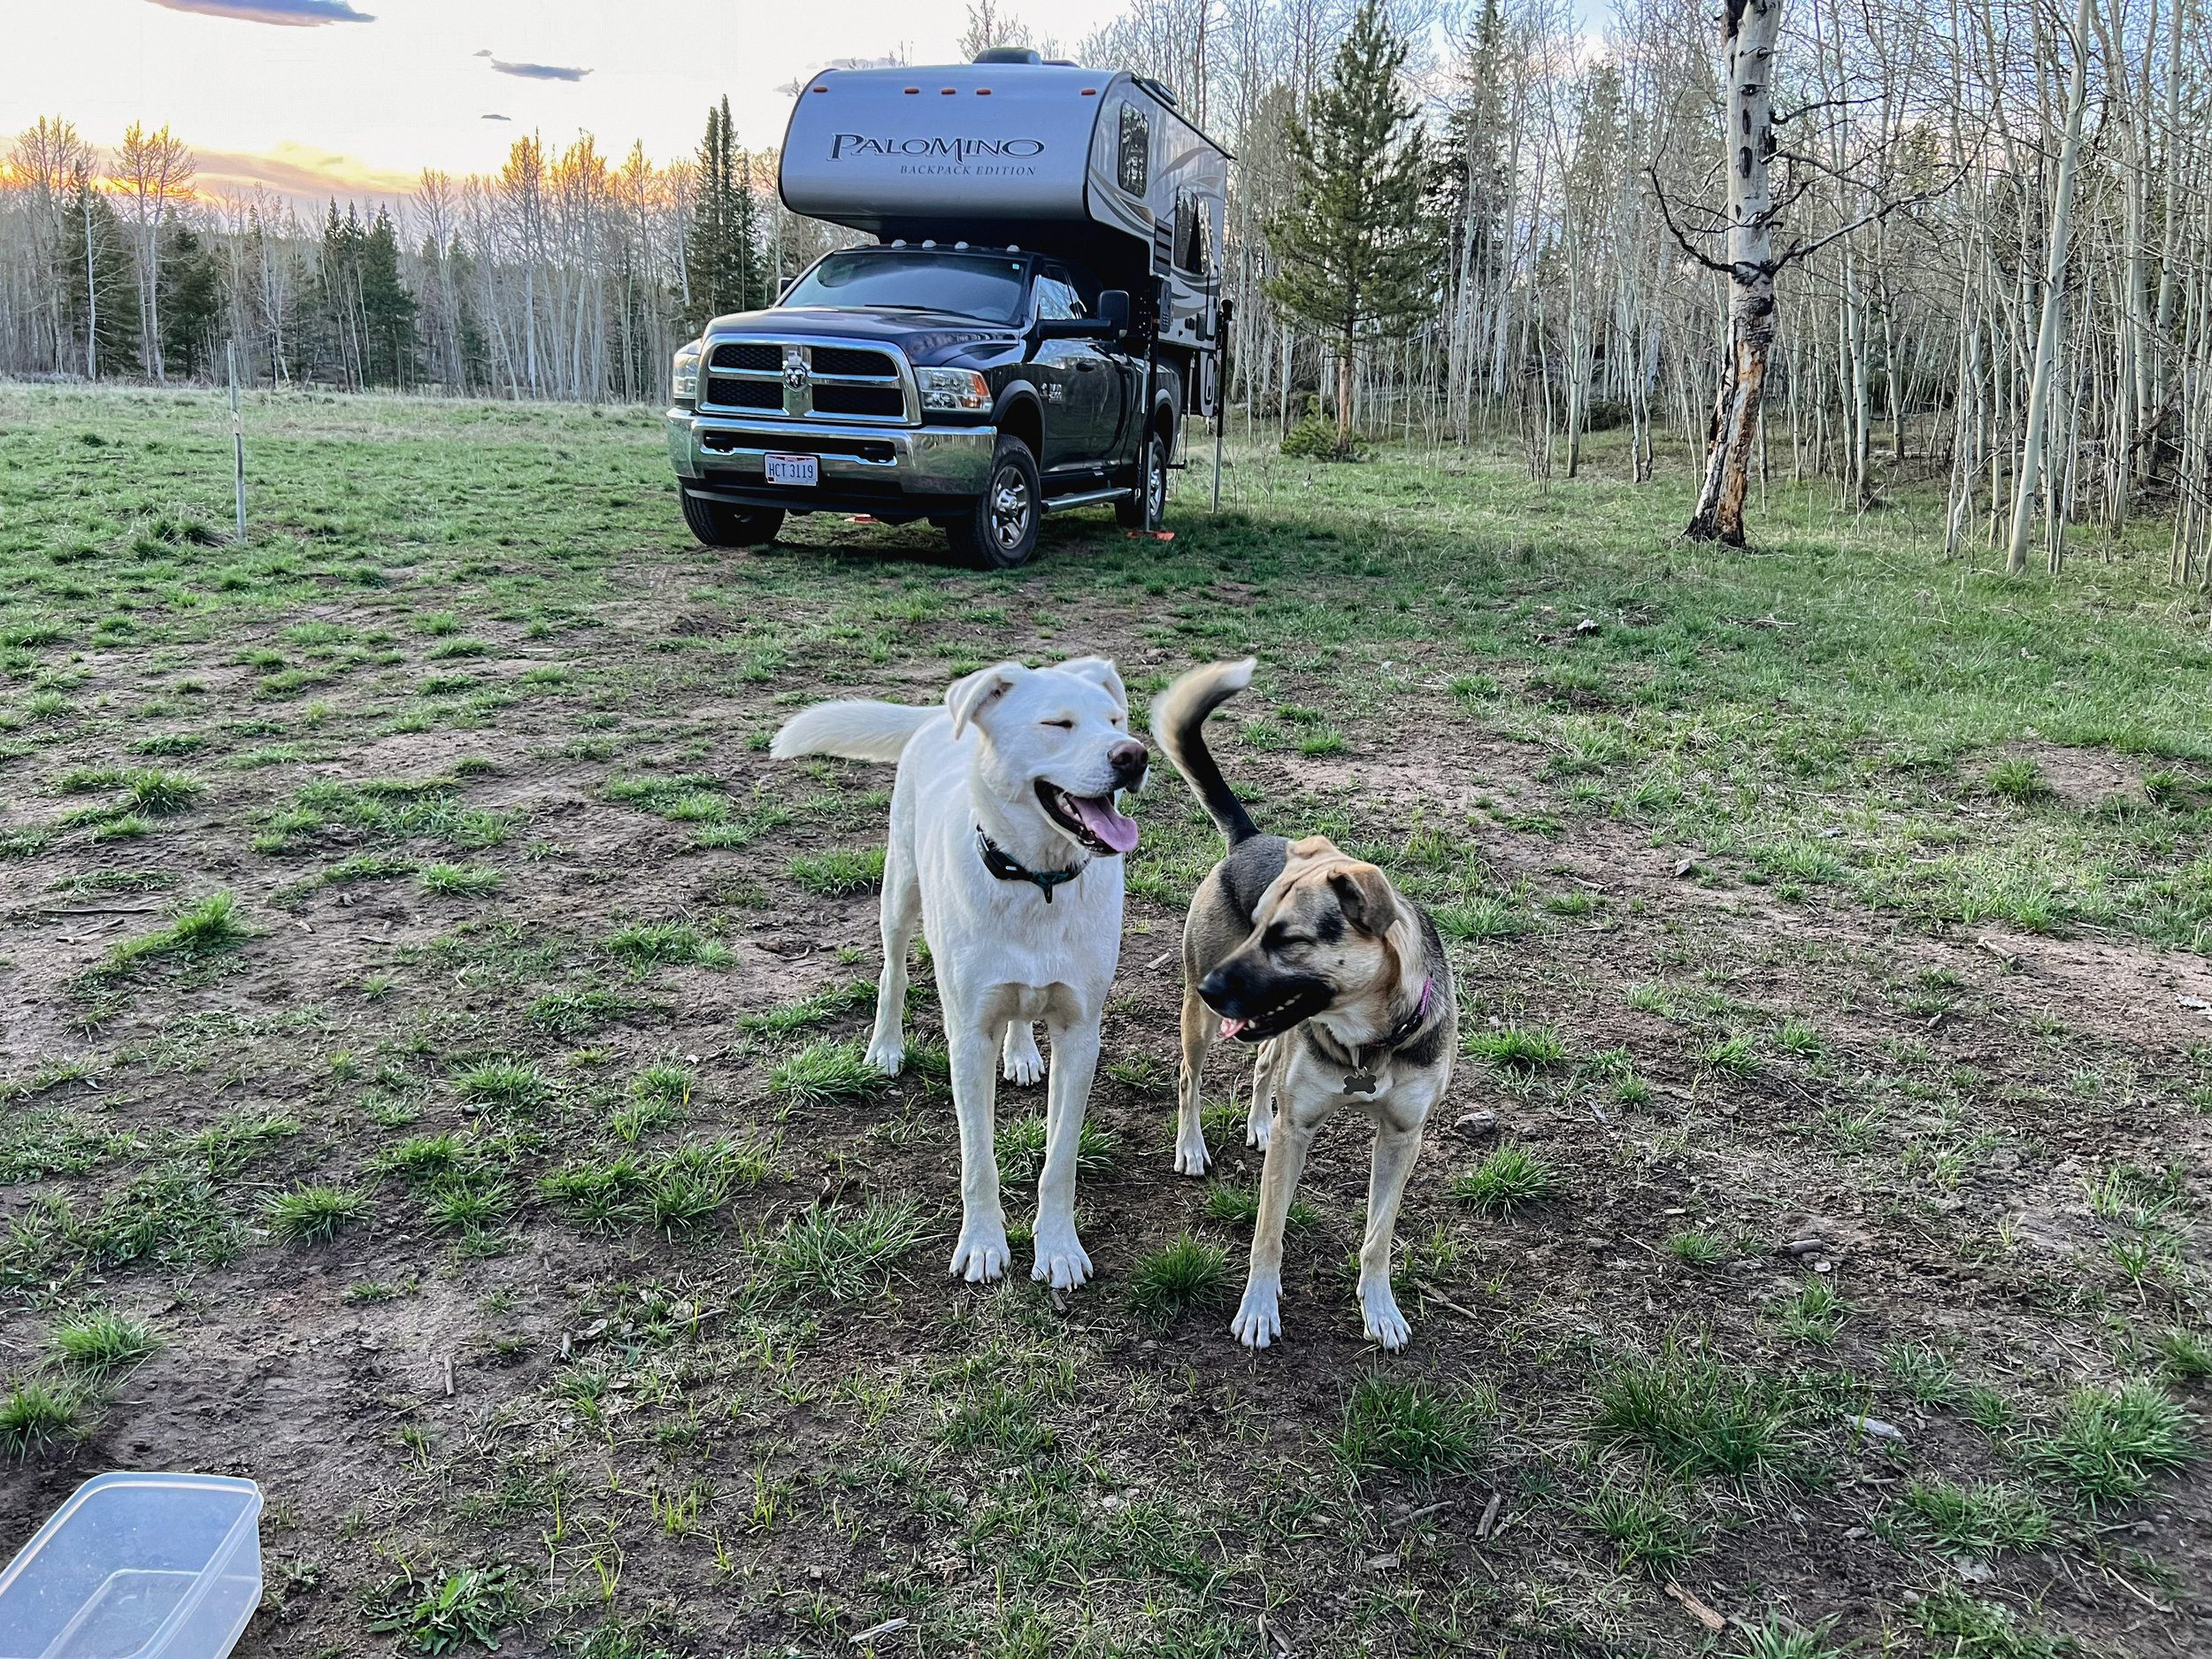  Pickles and Waffles sprinting around our dispersed camping area in Rand, CO. Posing in front of my mom’s truck camper.  